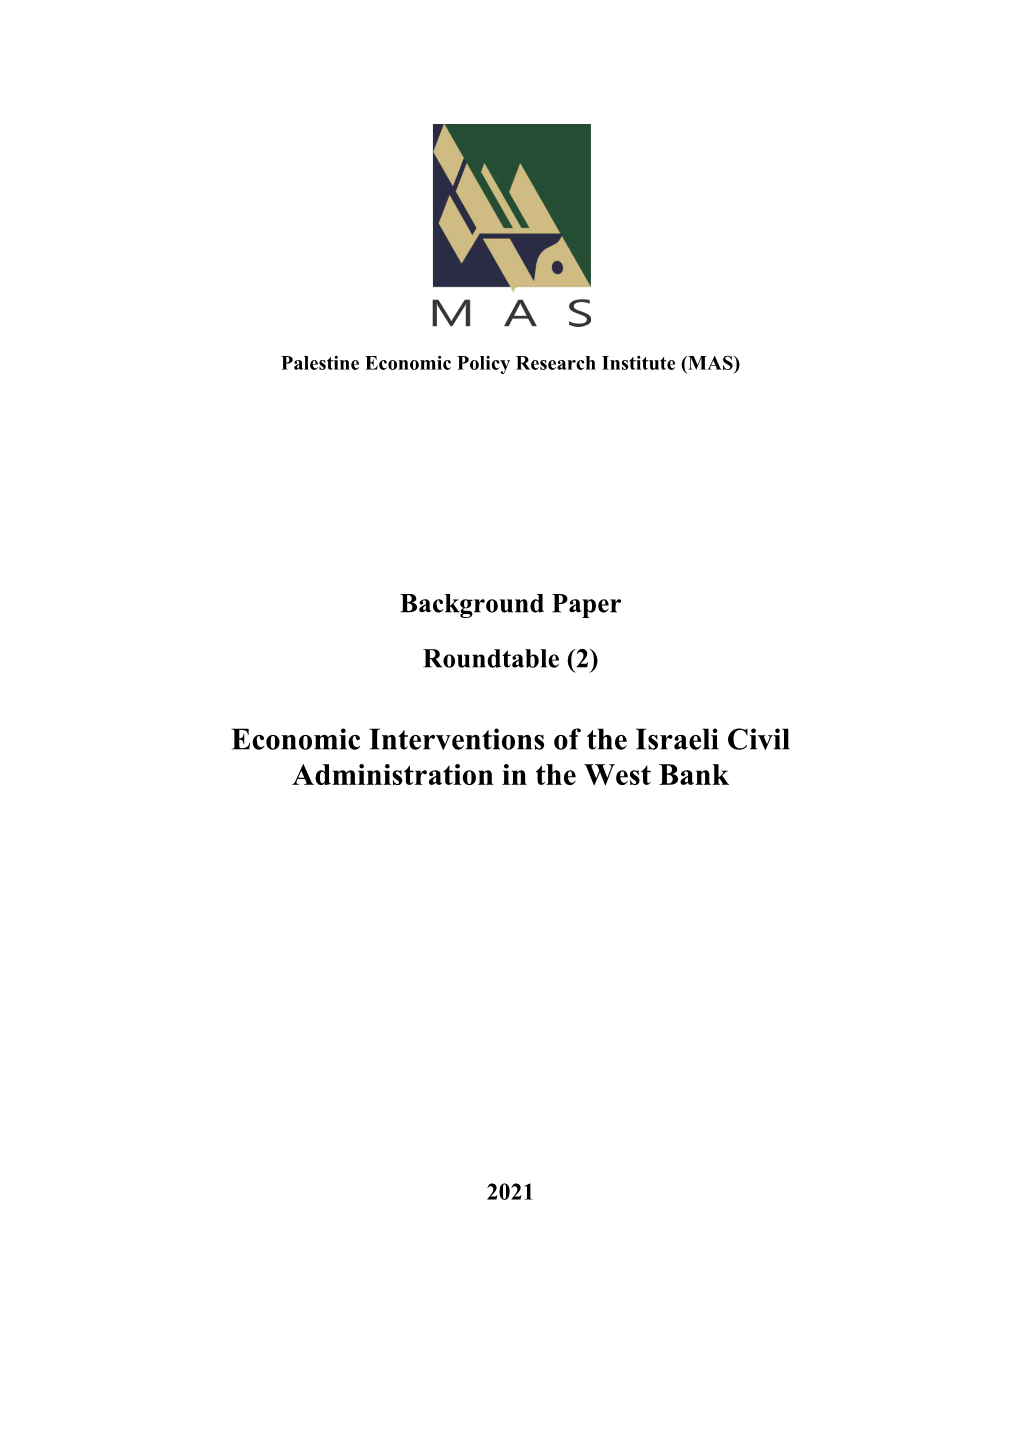 Economic Interventions of the Israeli Civil Administration in the West Bank